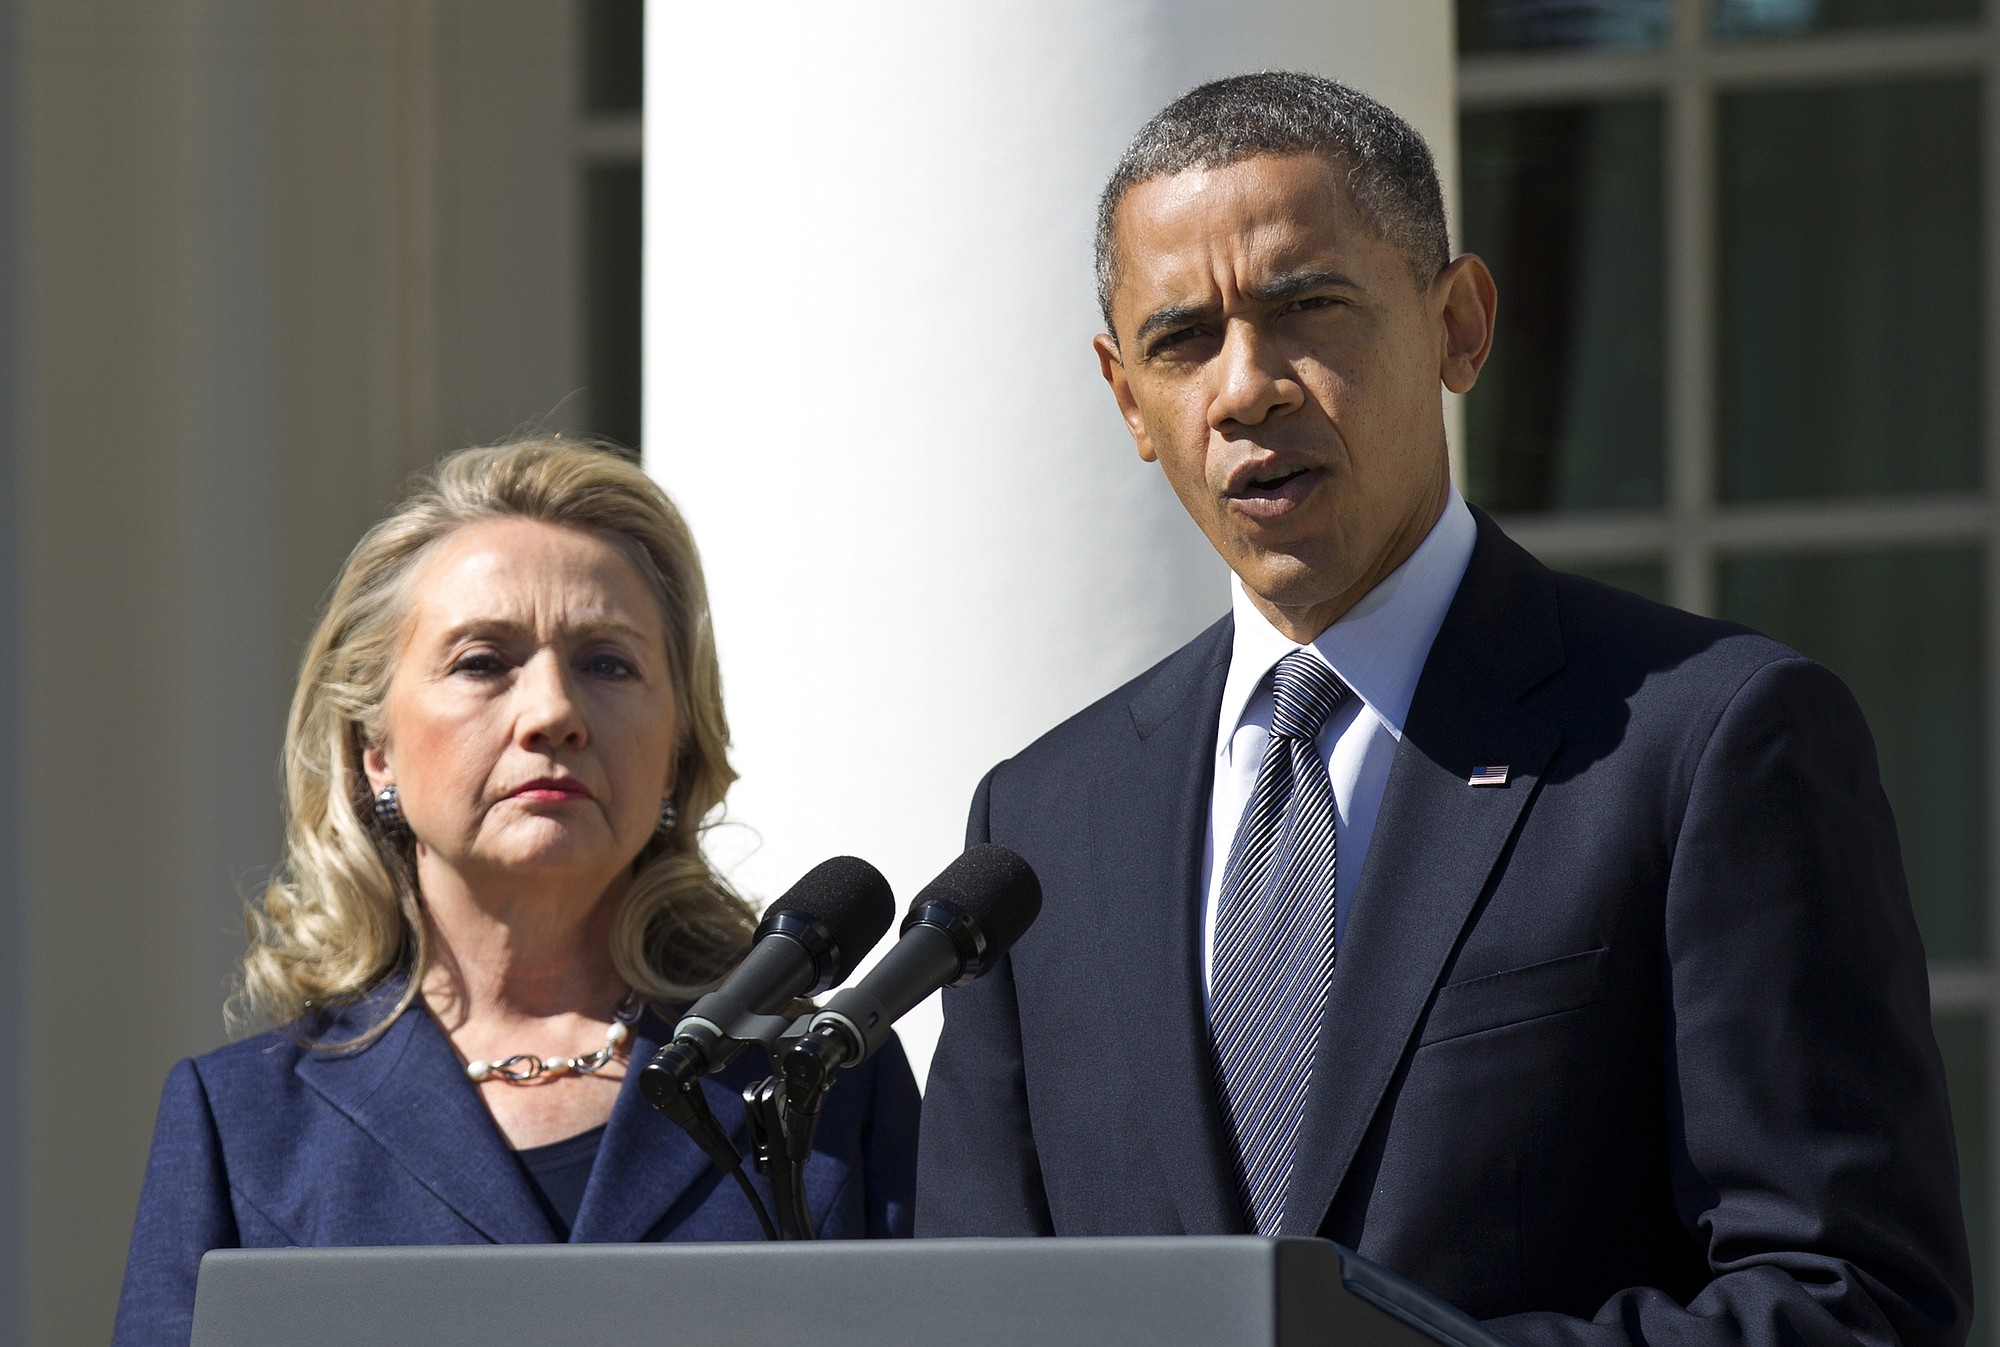 President Barack Obama, accompanied by then-Secretary of State Hillary Rodham Clinton, speaks in the Rose Garden of the White House in Washington.